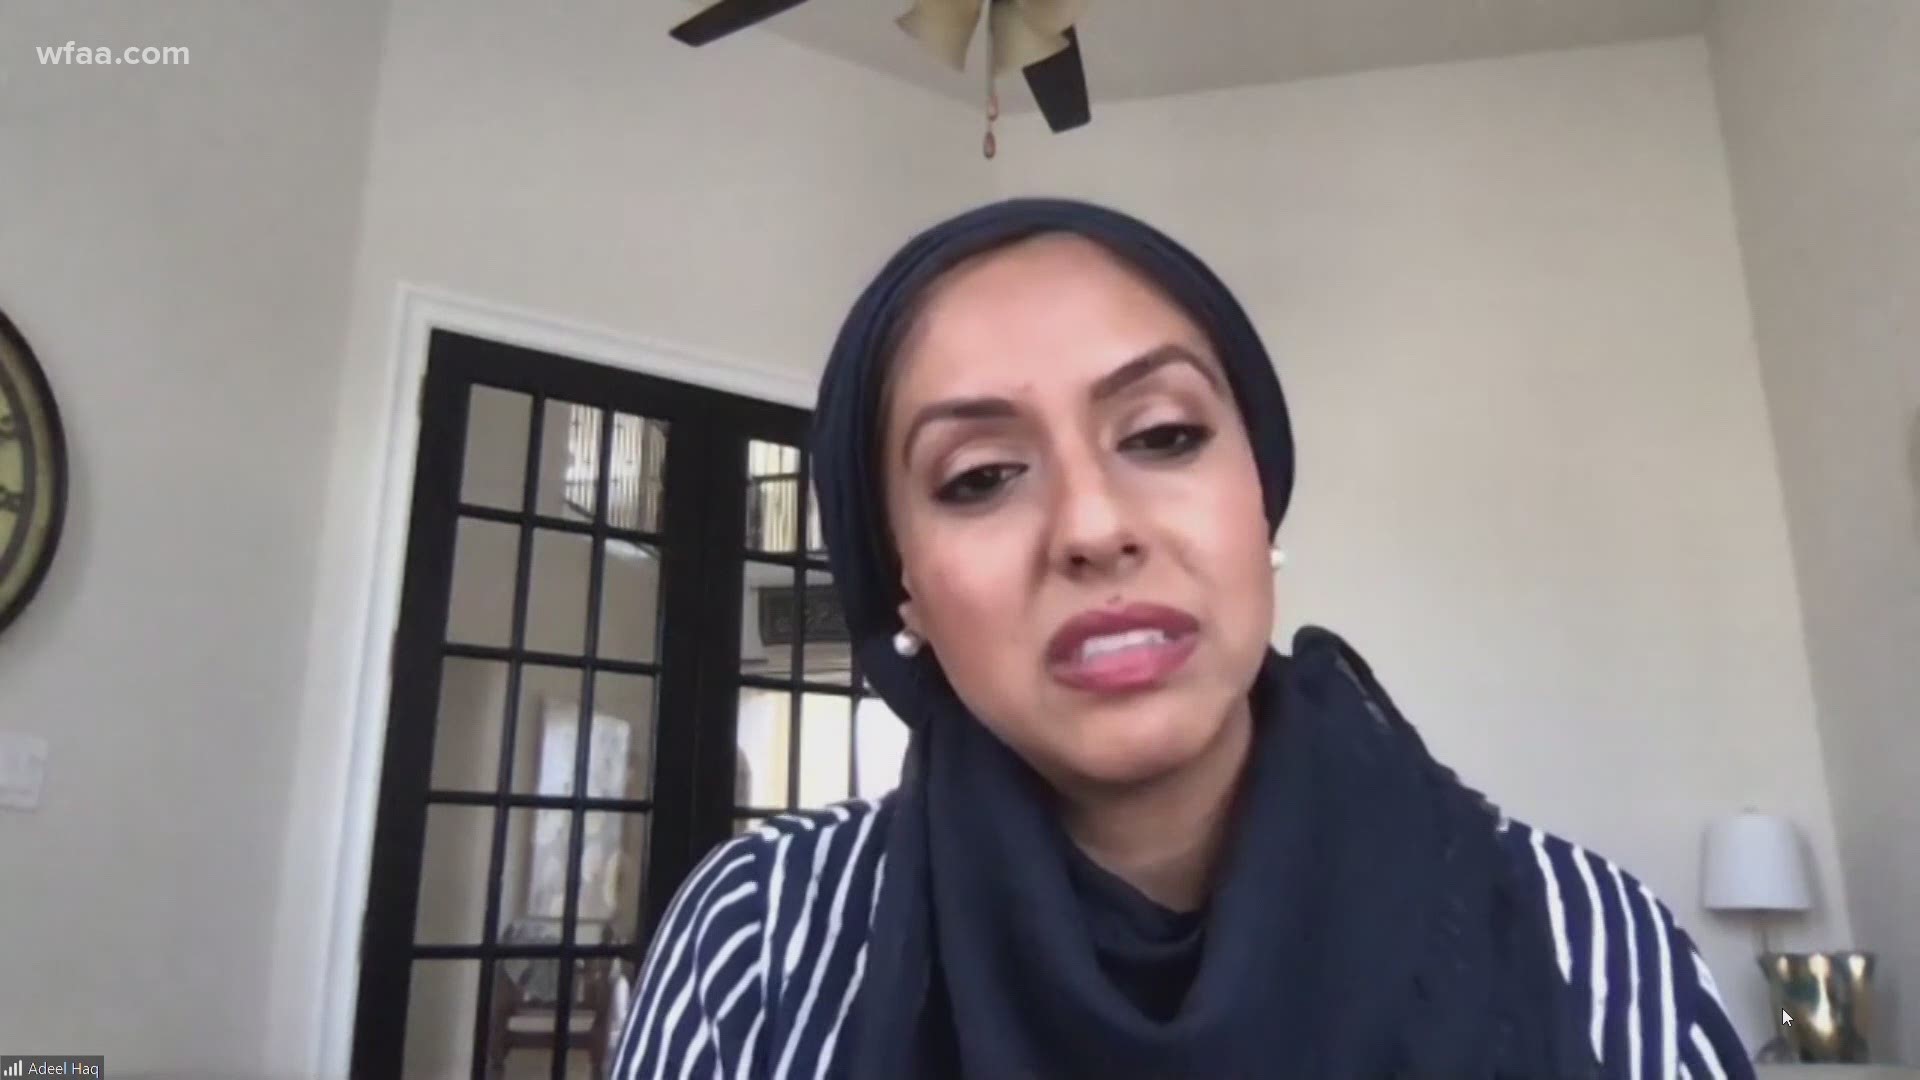 Sadaf Haq, who is Muslim, says mailers claiming she supports sharia law did not come from her or anyone she knows.